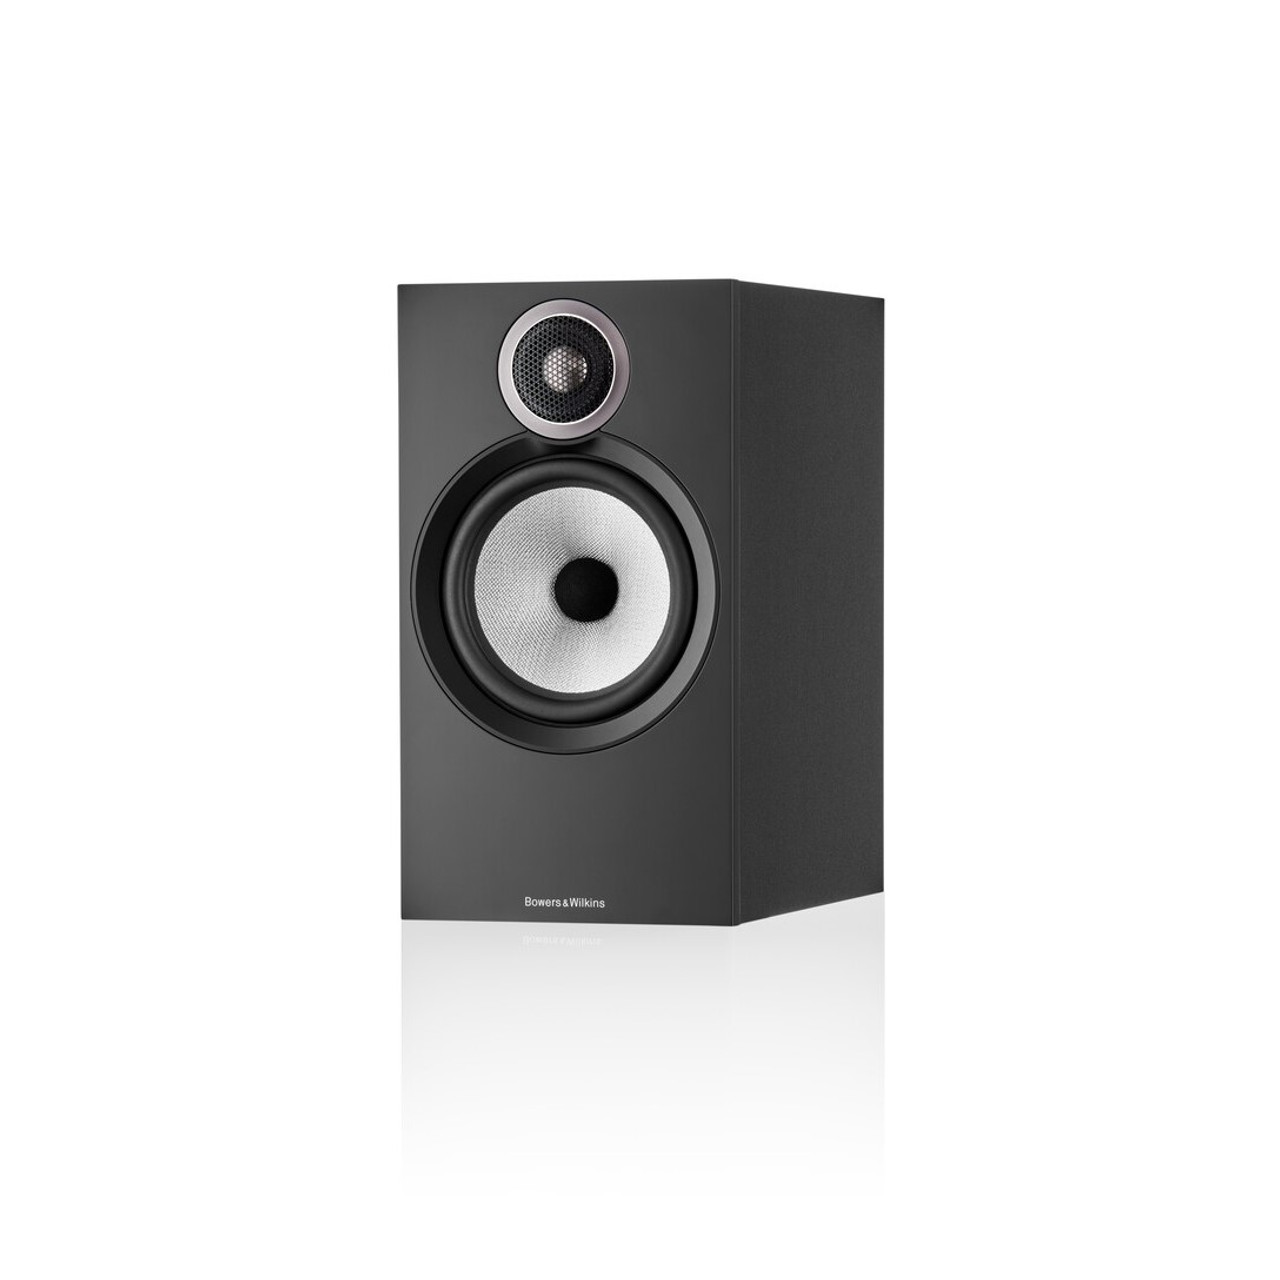 Bowers & Wilkins 606 S3 Bookshelf Speakers Review: Classic and Clinical